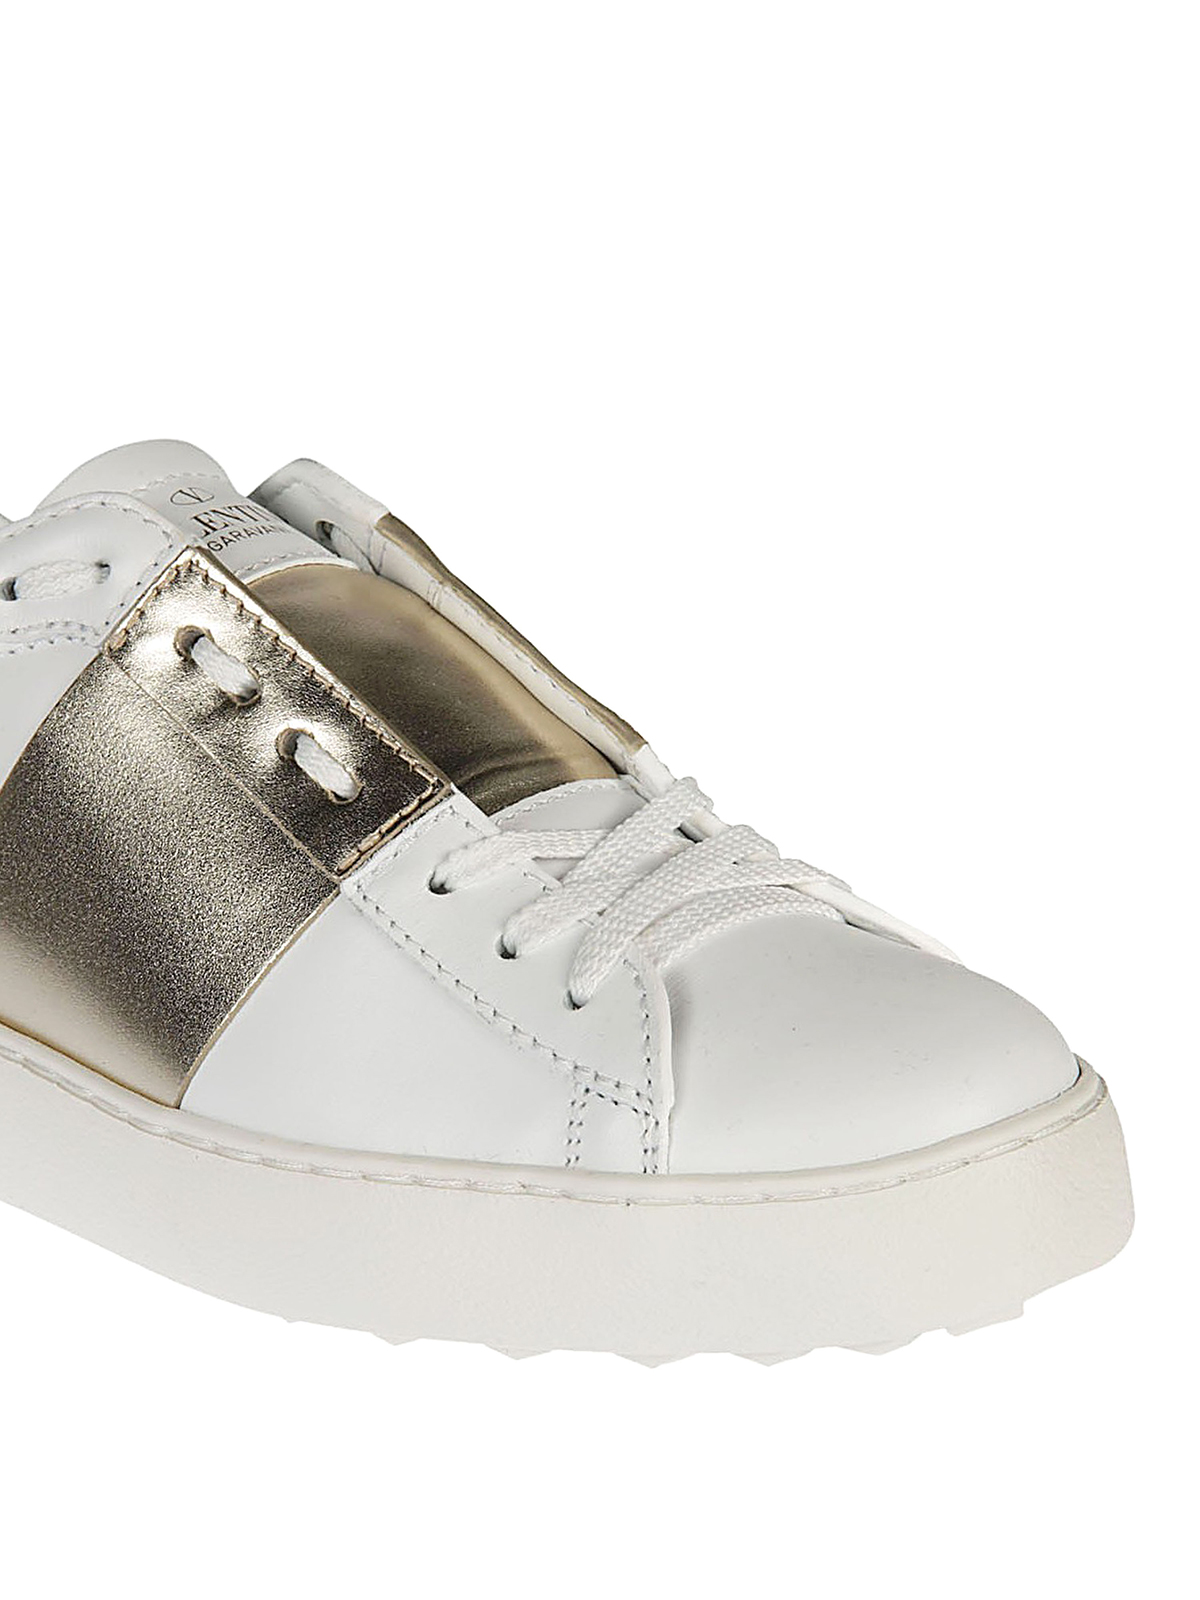 gold band leather sneakers 